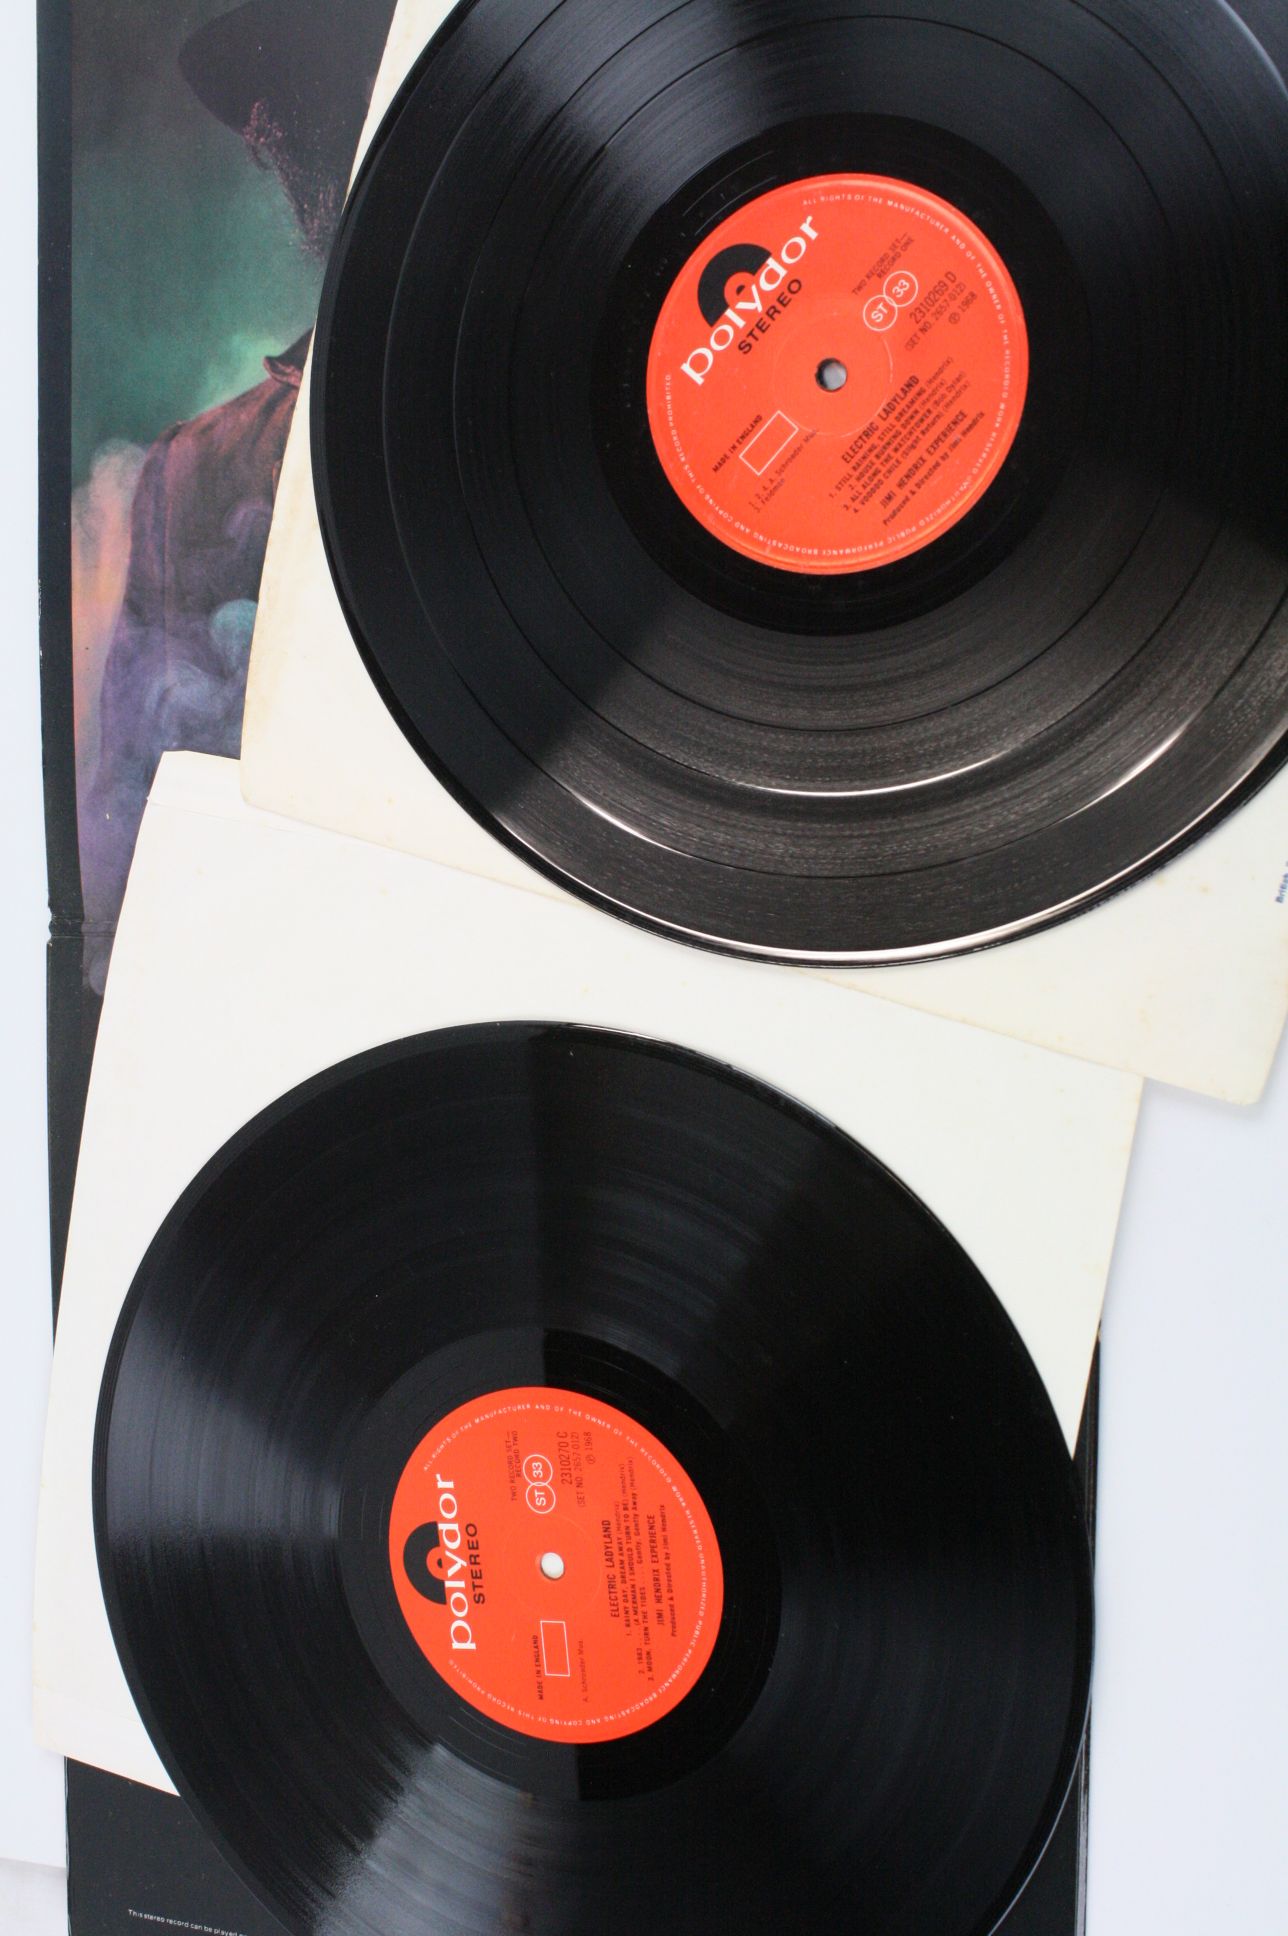 Vinyl - Jimi Hendrix Electric Ladyland on Polydor 2657012 reissue with white lettering inside, - Image 4 of 8